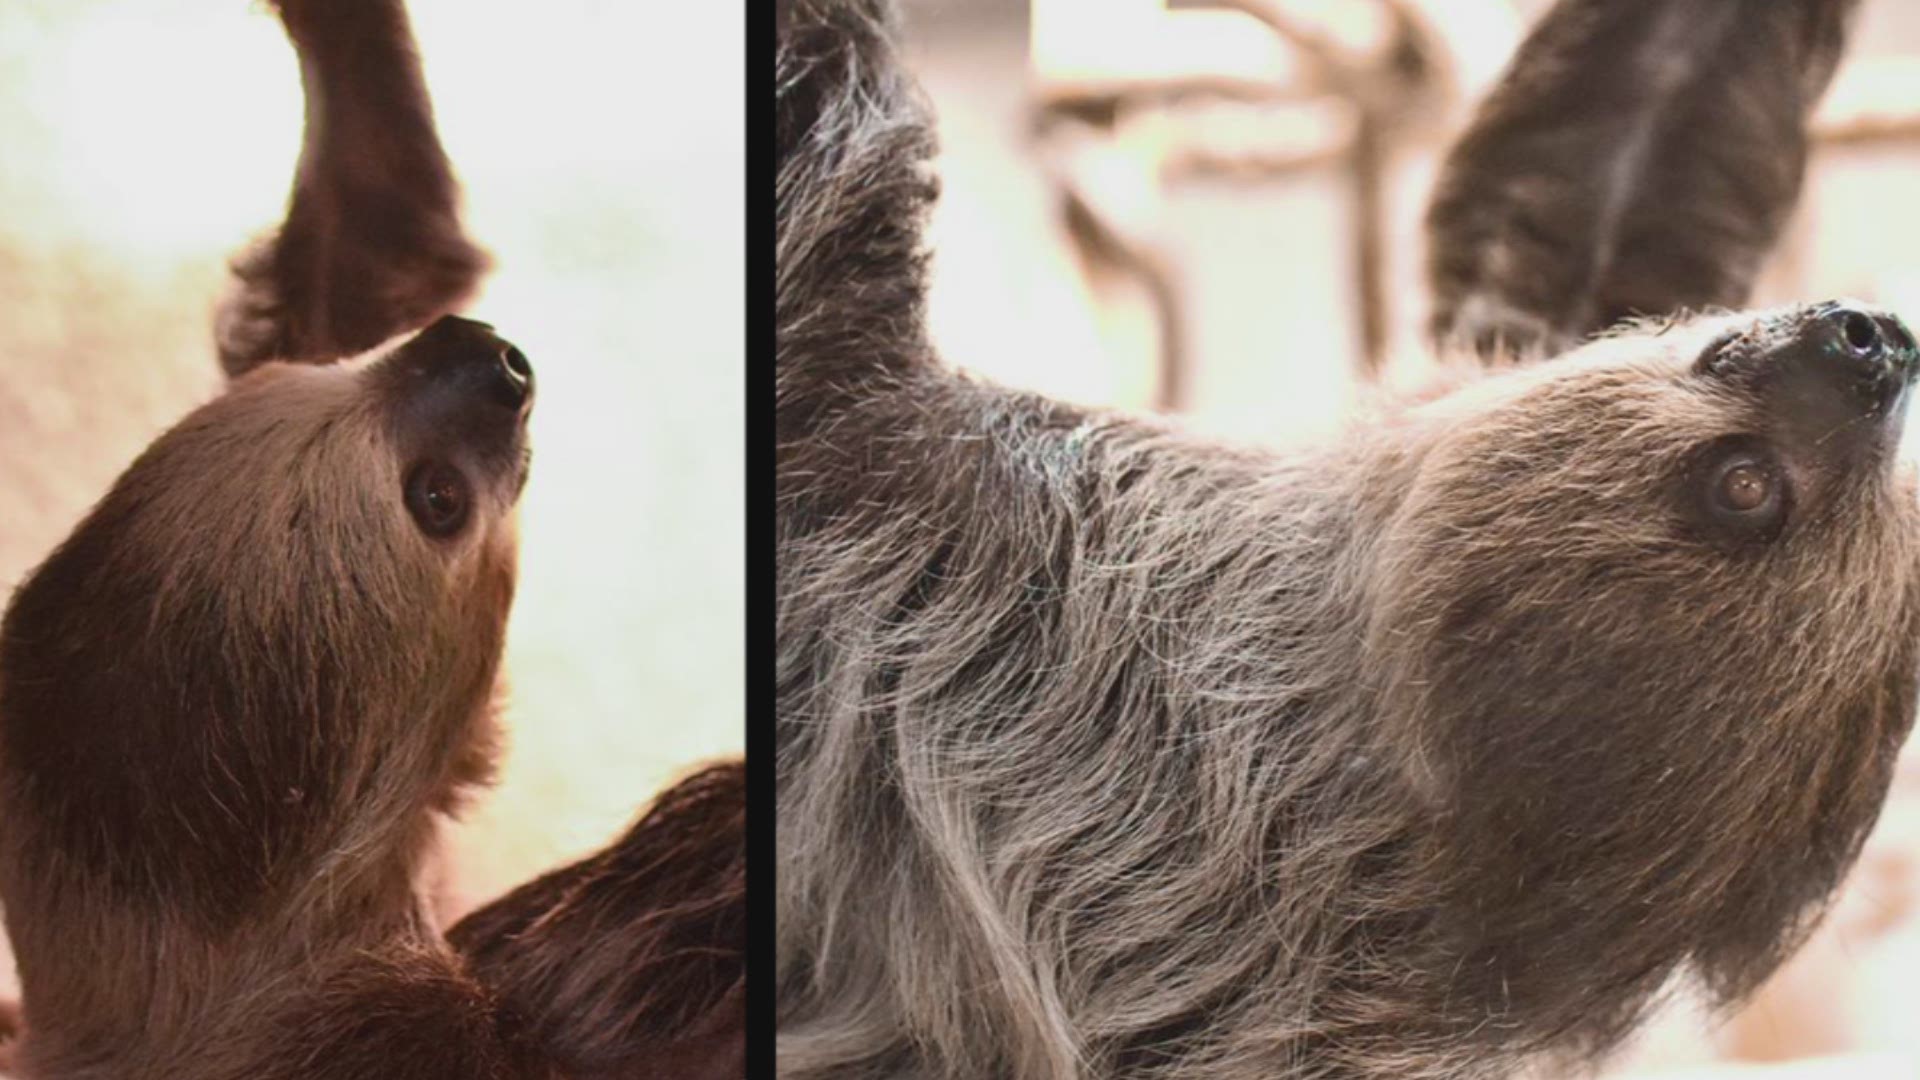 The Virginia Zoo welcomed two Two-Toed Sloths, Honey and Mervin, on March 1.